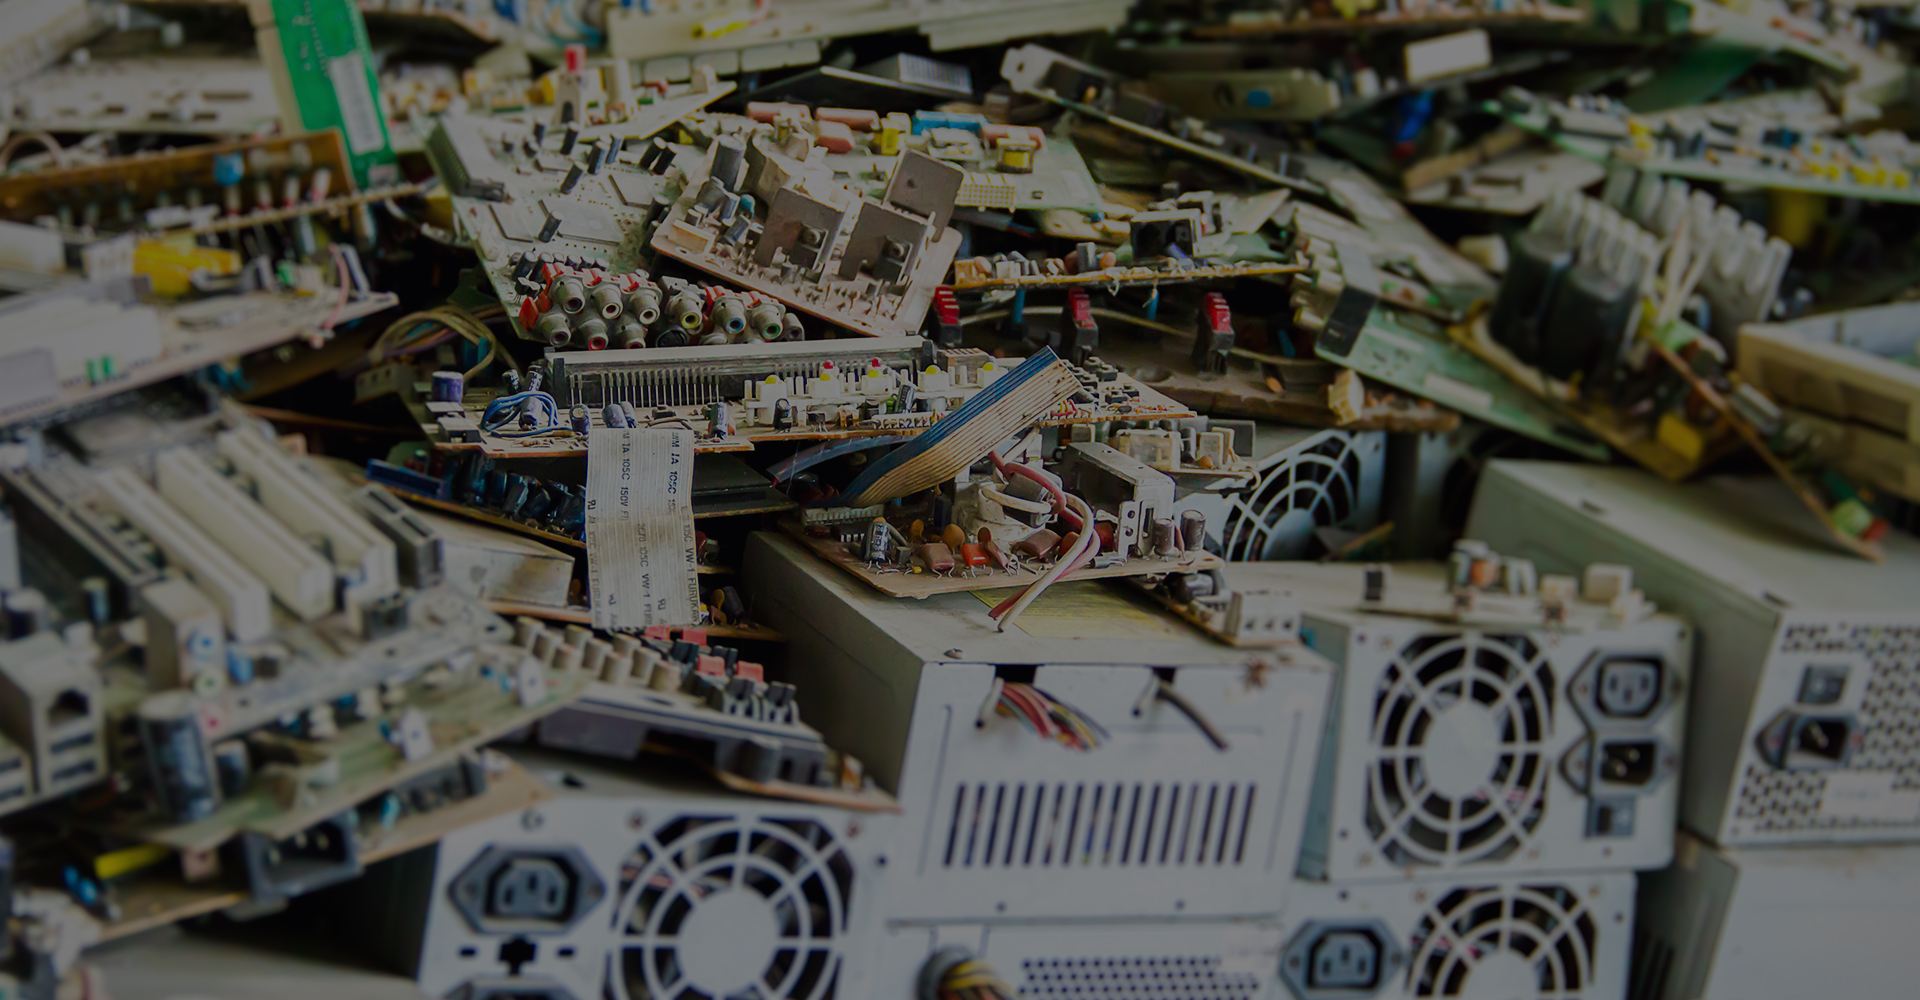 various desktop computers disassembled for recycling